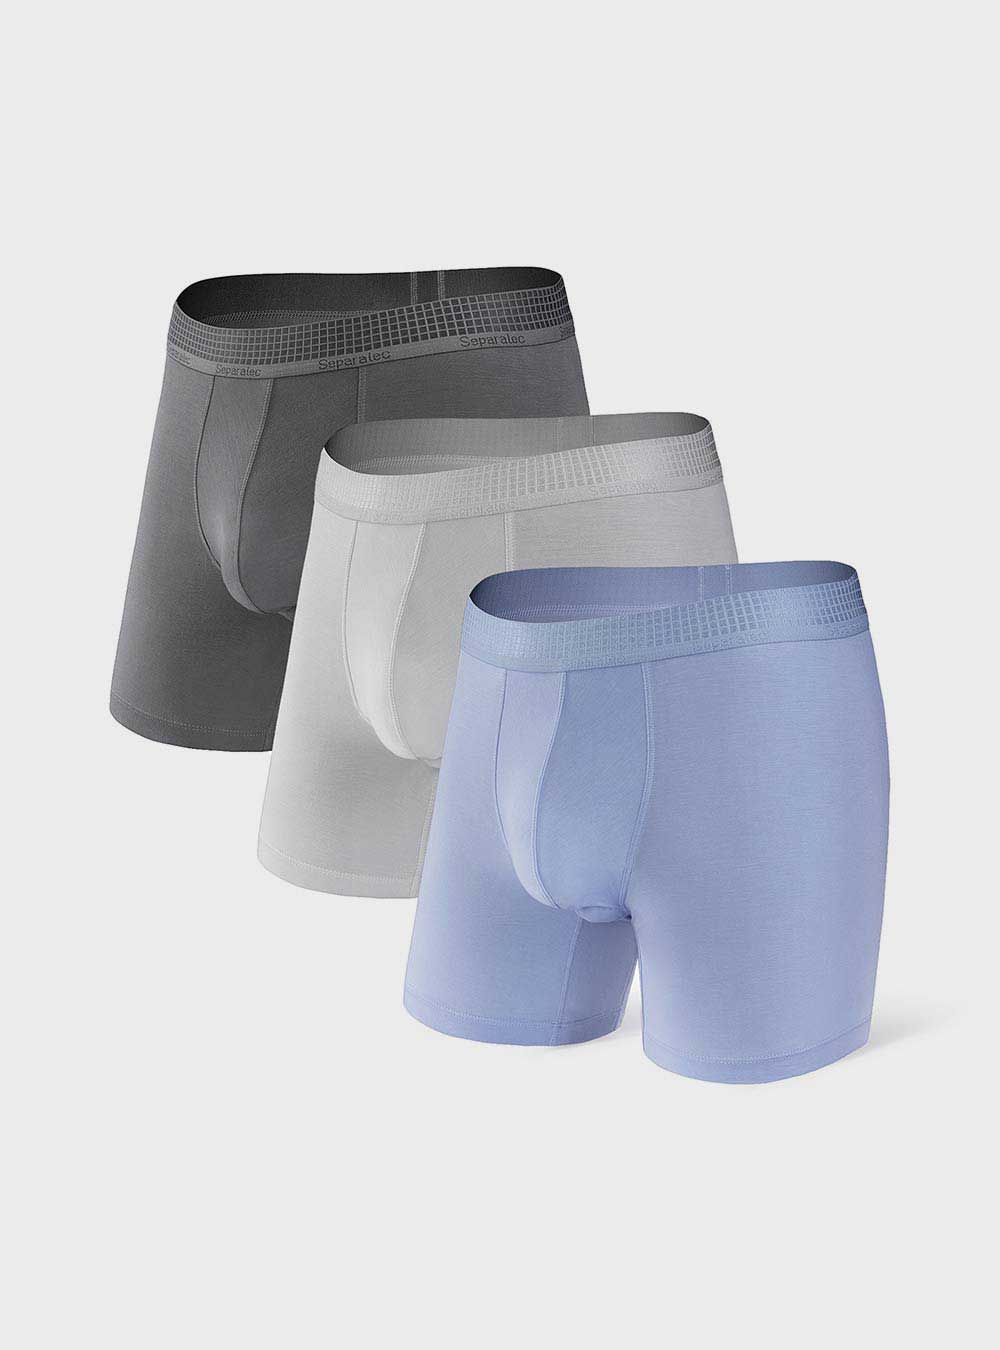 Customer reviews: Separatec Men's Cotton Boxer Briefs Pouch  Support Stretchy Underwear for a Week 7 Pack